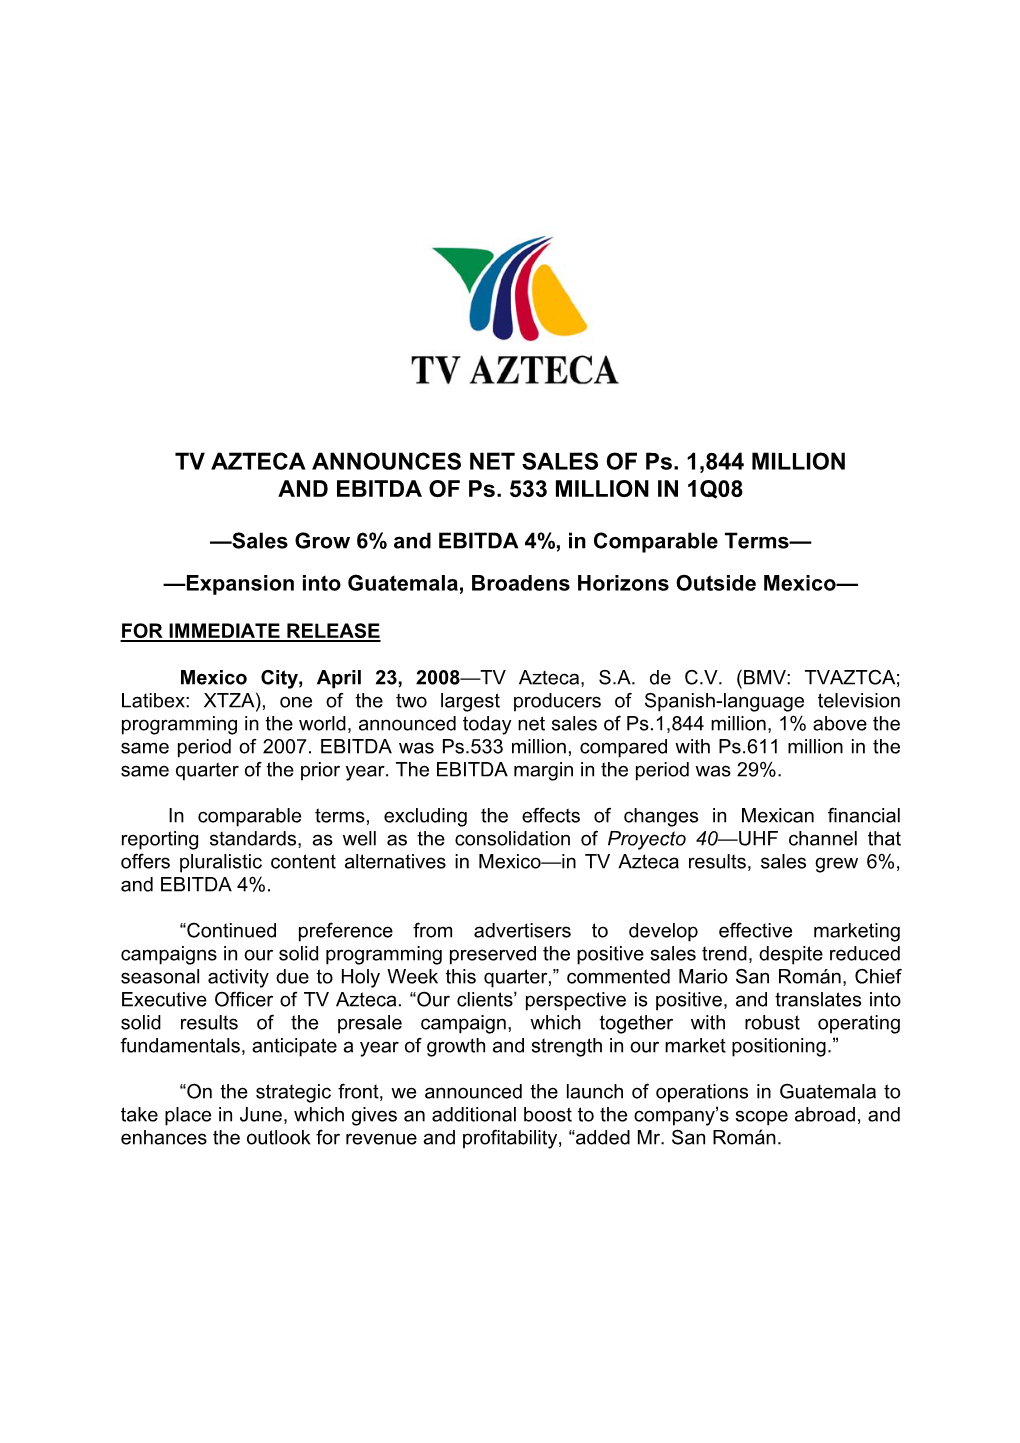 TV AZTECA ANNOUNCES NET SALES of Ps. 1,844 MILLION and EBITDA of Ps. 533 MILLION in 1Q08